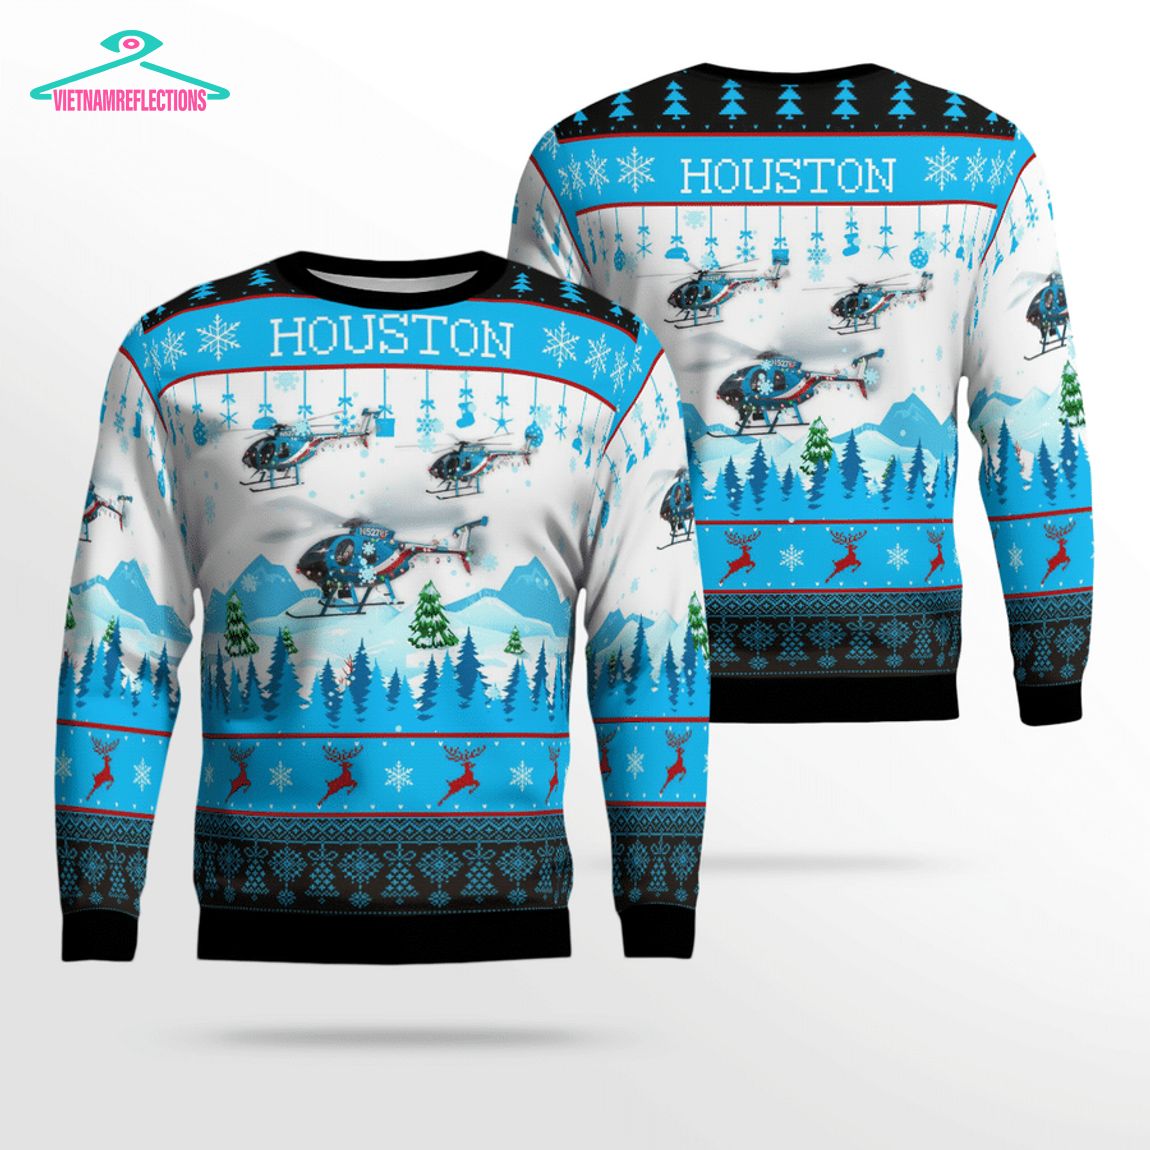 houston-police-helicopter-78f-n5278f-3d-christmas-sweater-1-FiE5r.jpg